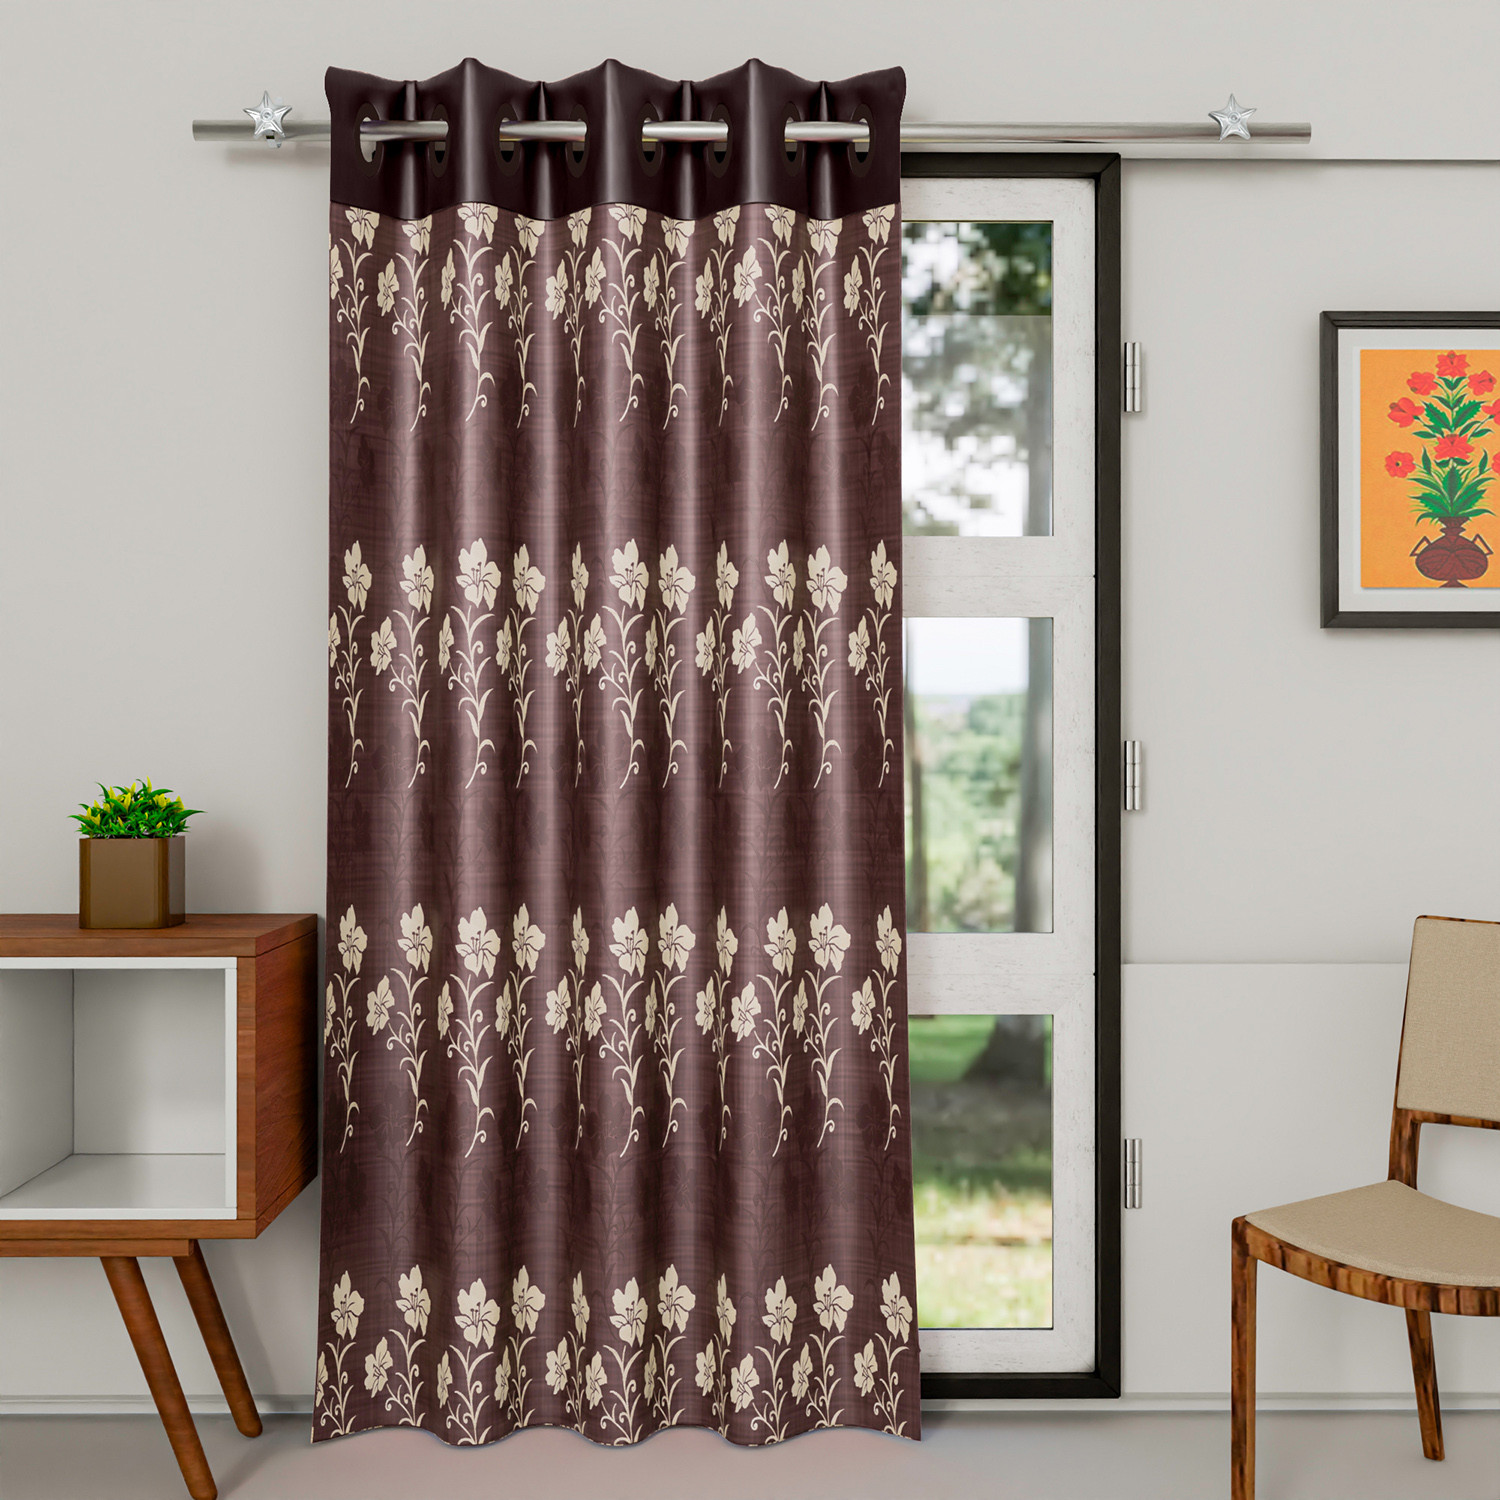 Kuber Industries Faux Silk Decorative 7 Feet Door Curtain | Floral Print Blackout Drapes Curtain With 8 Eyelet For Home & Office (Coffee)